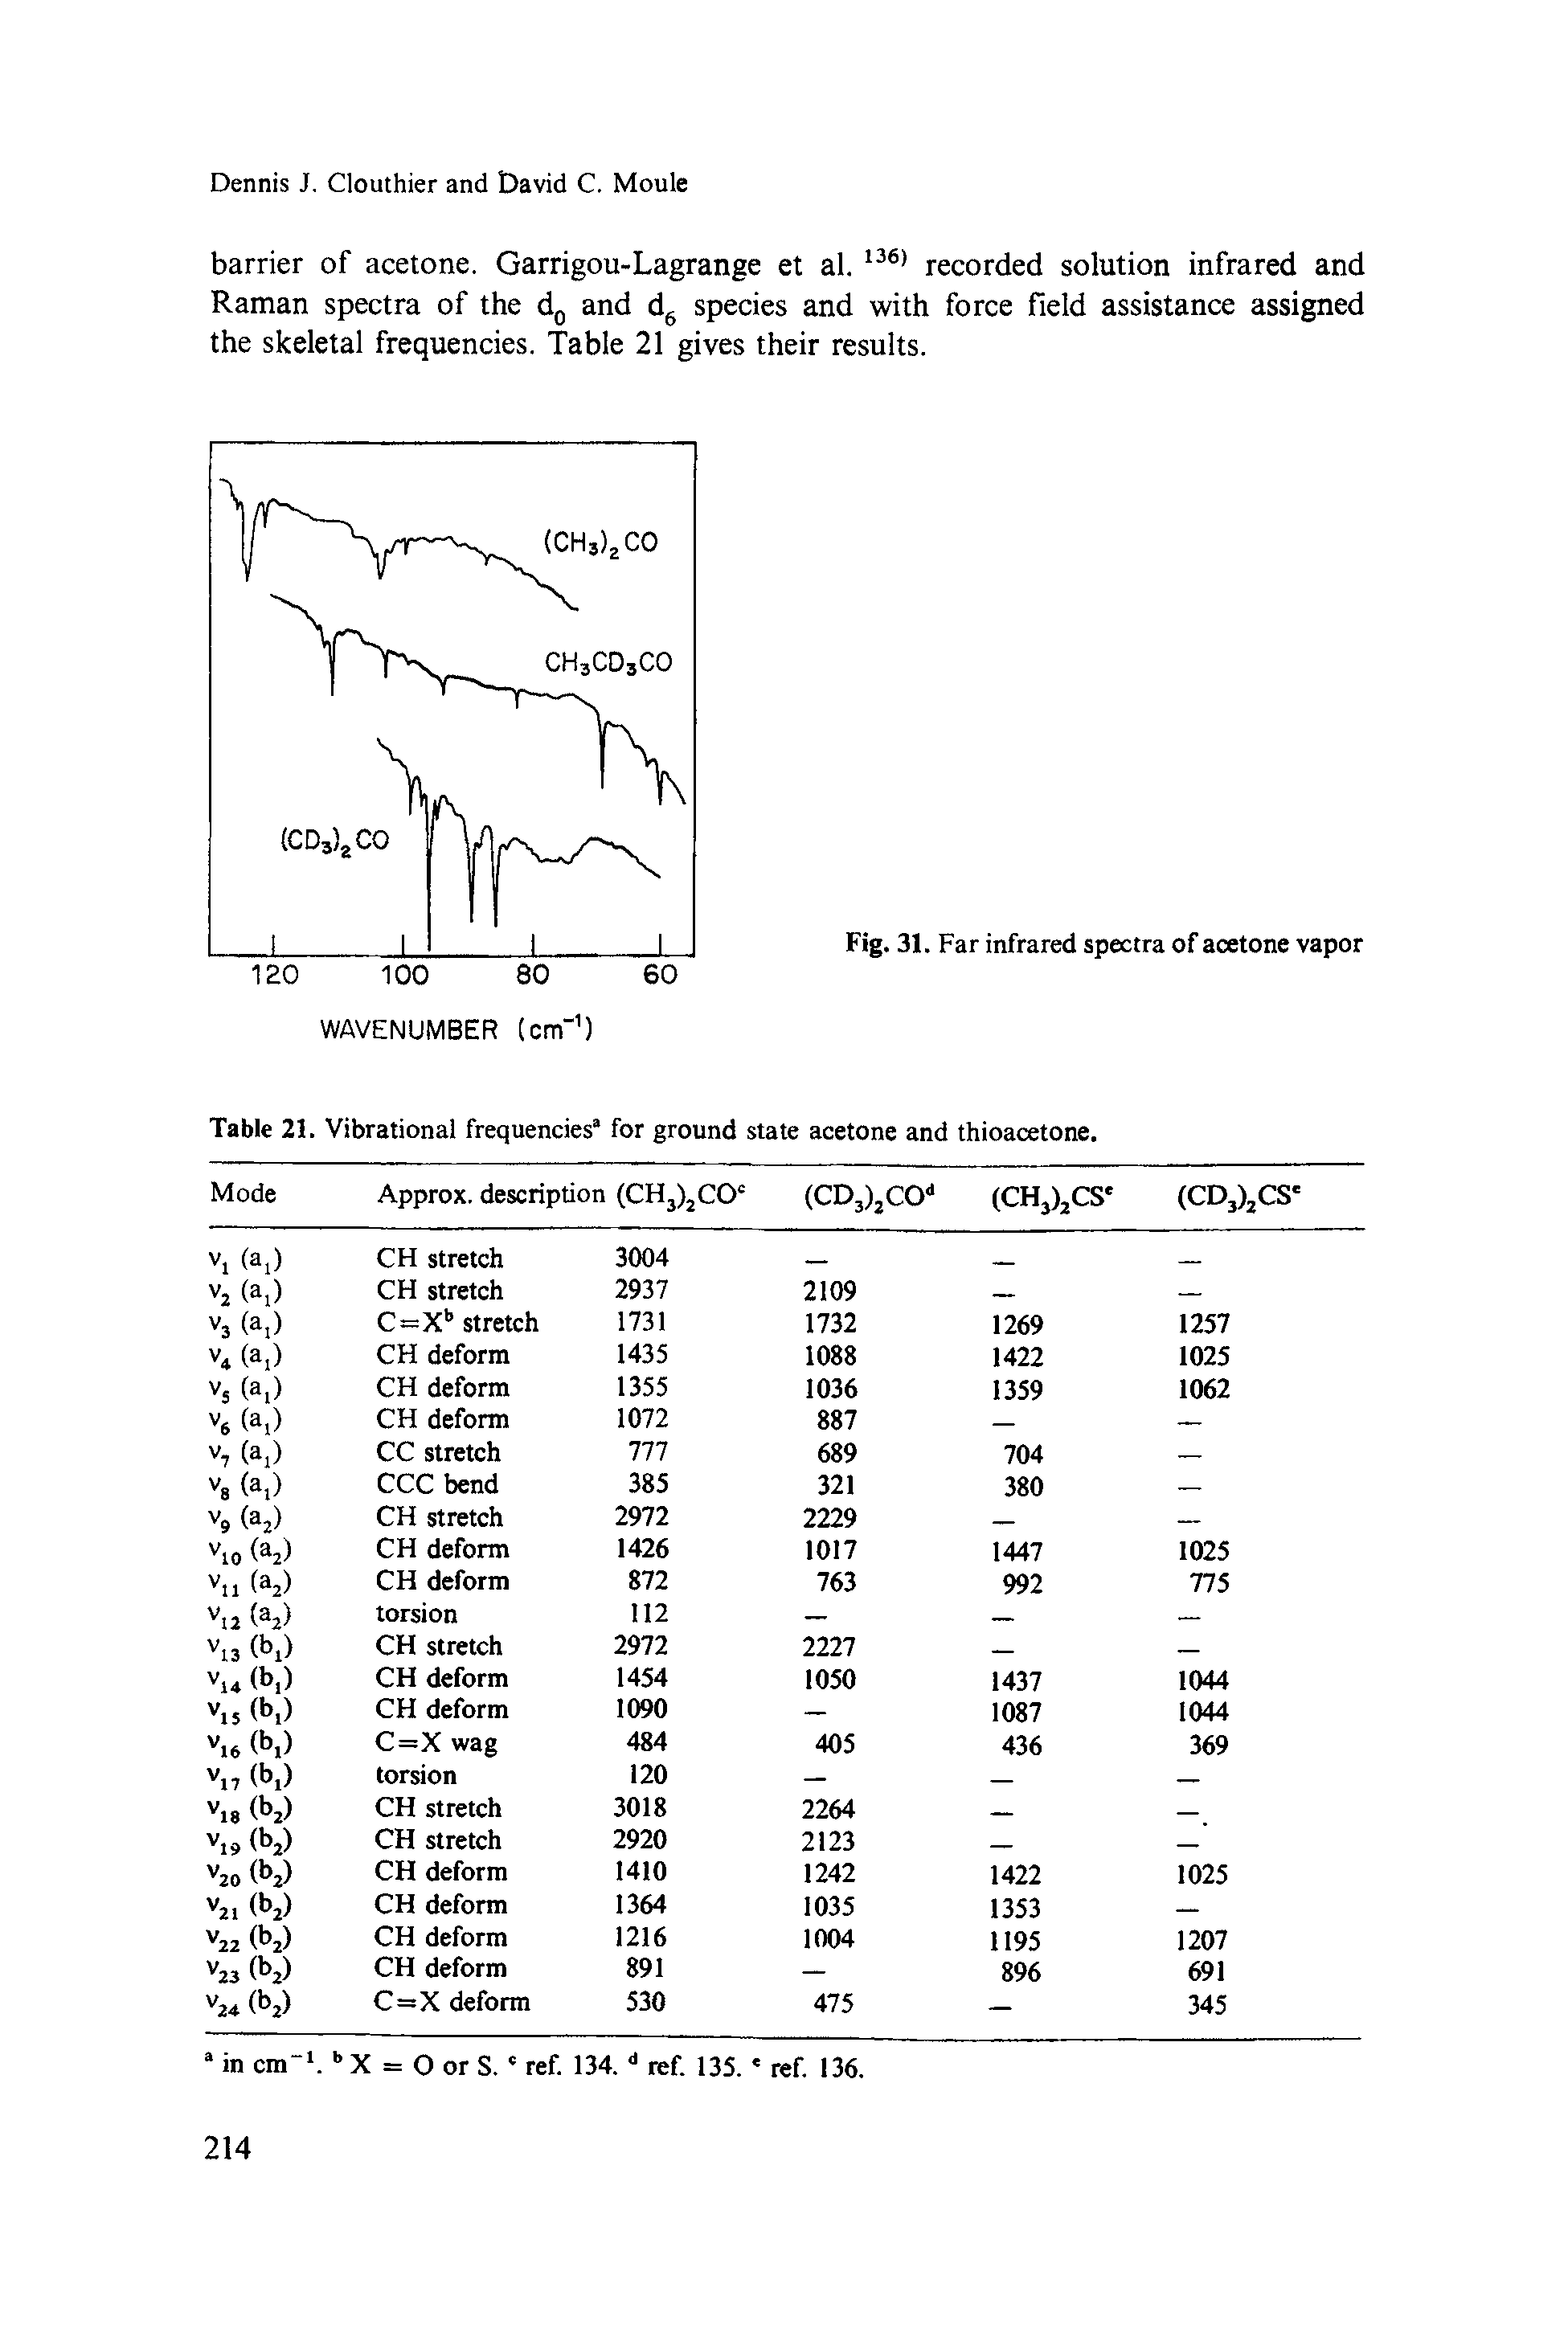 Table 21. Vibrational frequencies for ground state acetone and thioacetone.